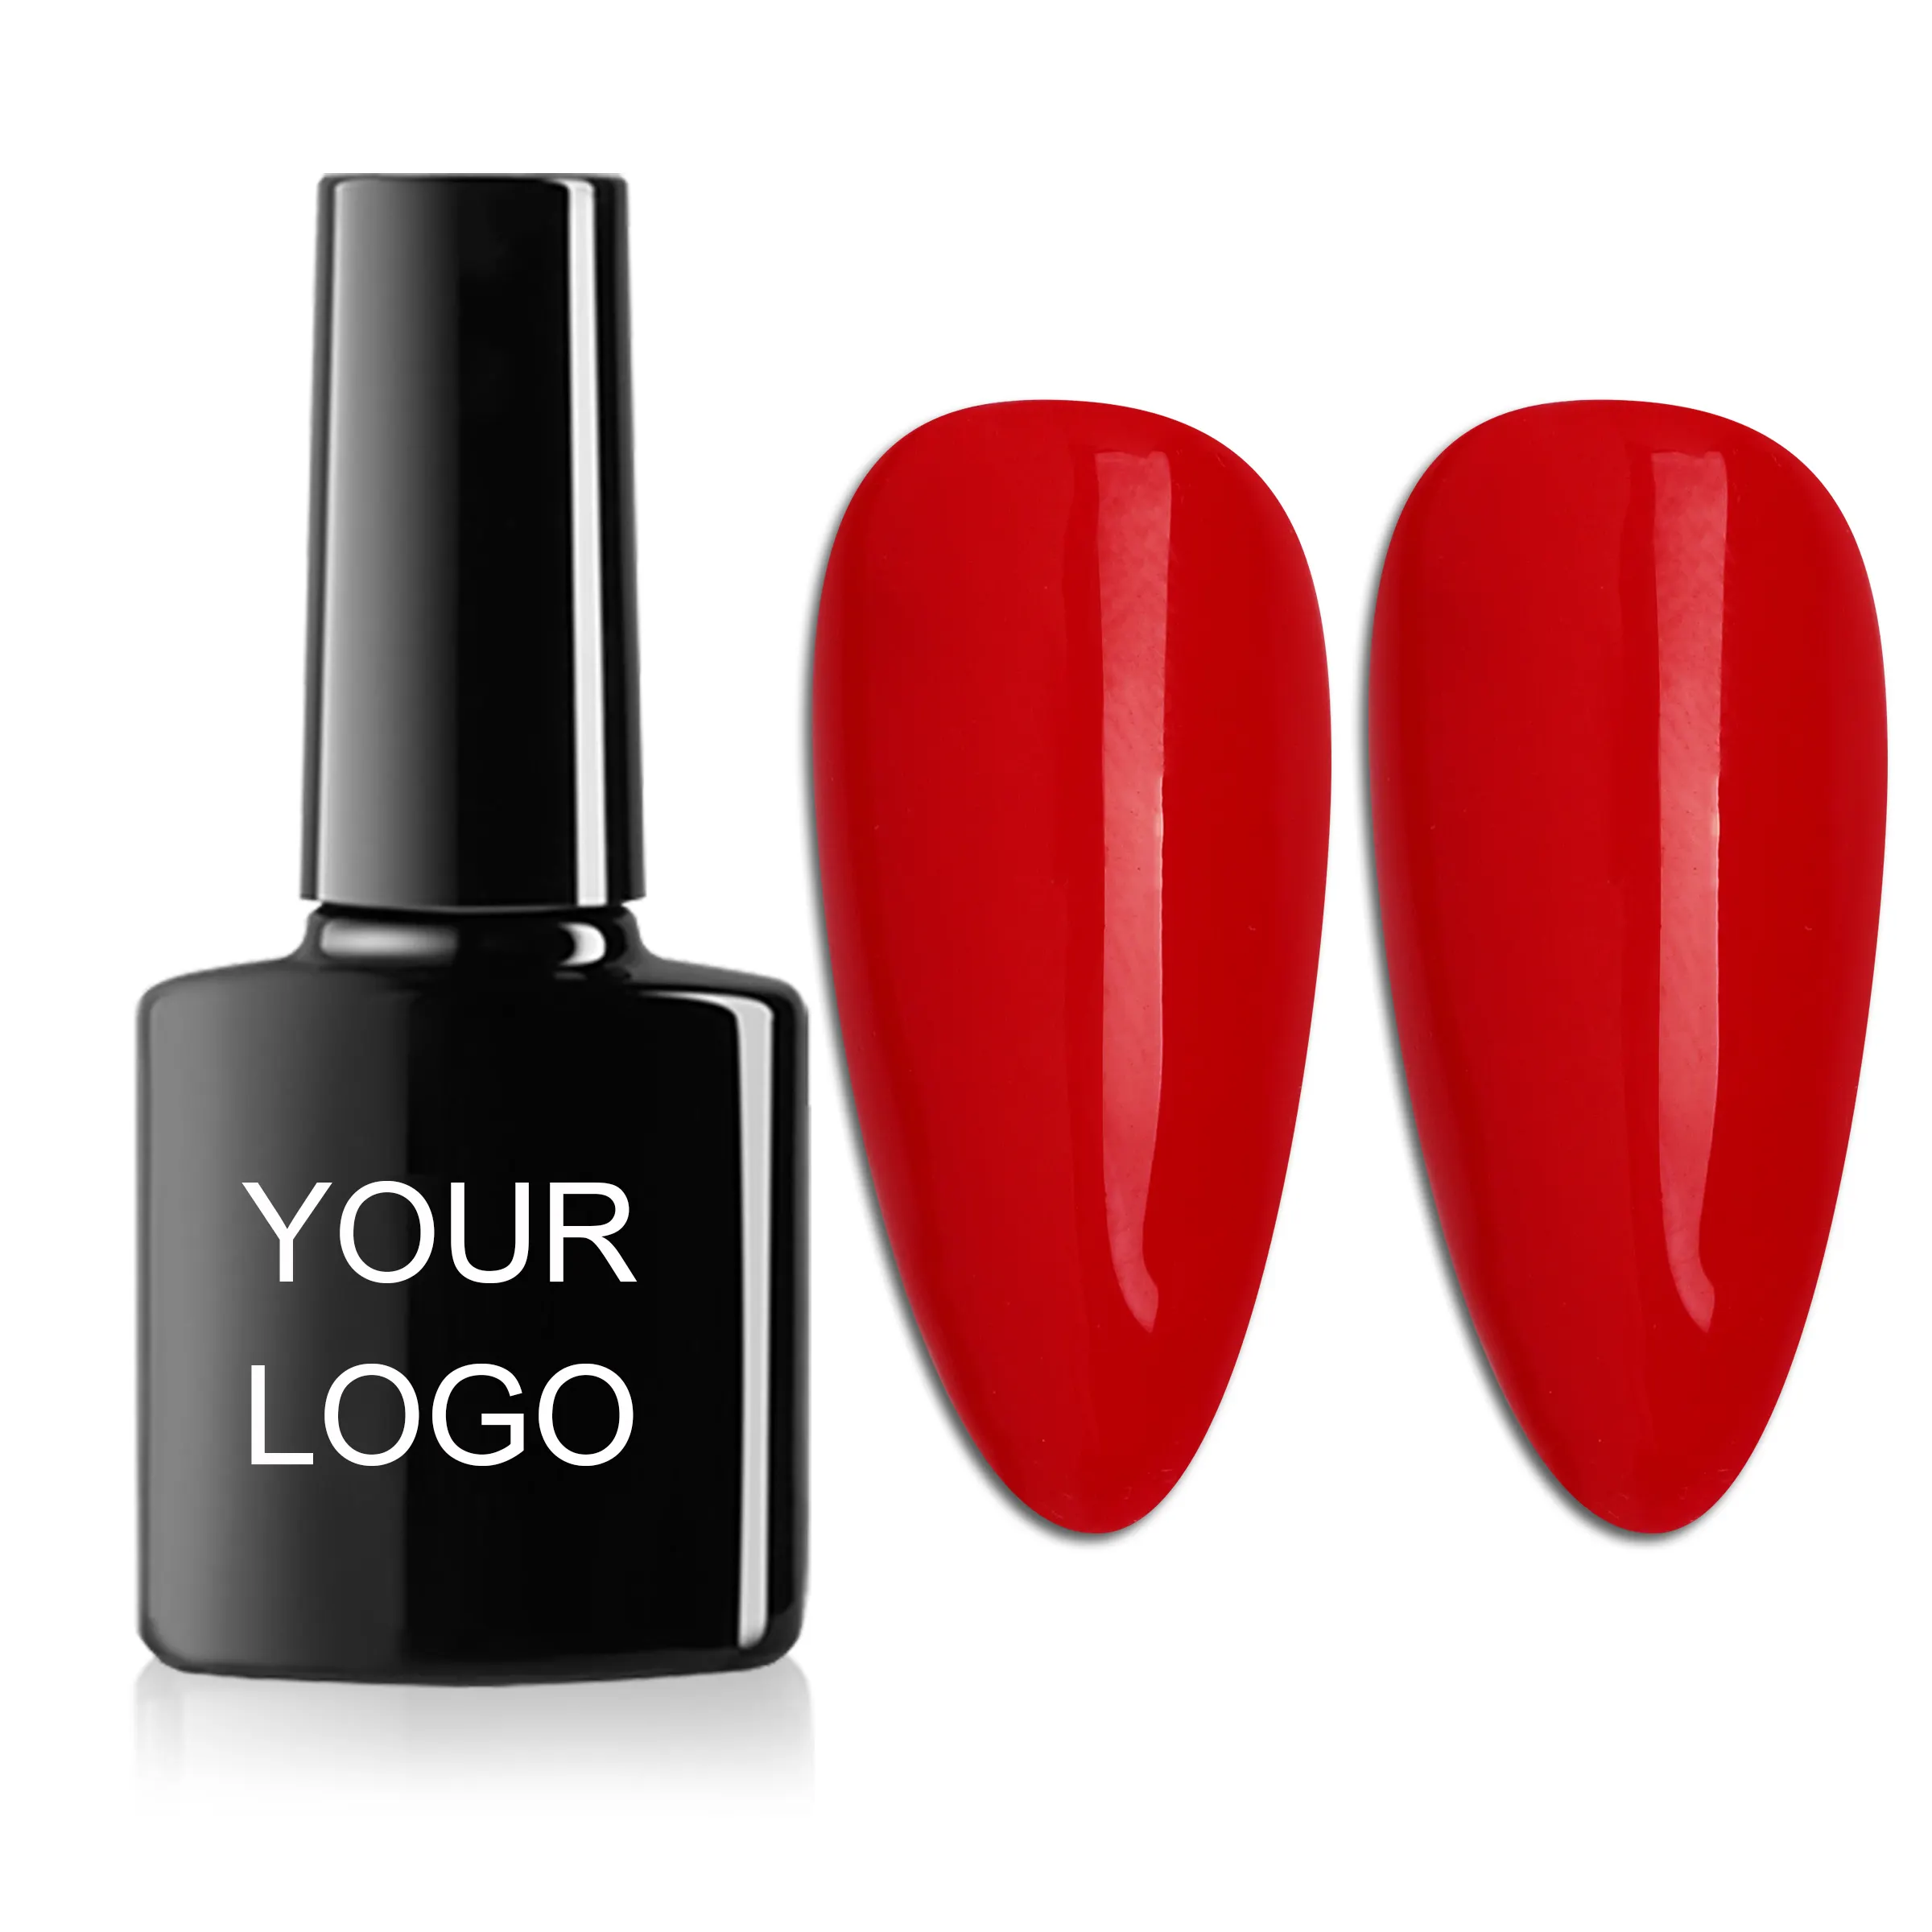 yidingcheng gel factory Nail manicure Enamel UV OEM odm Creat Your Brand private logo Lacquer Varnish uv nail gel polish red